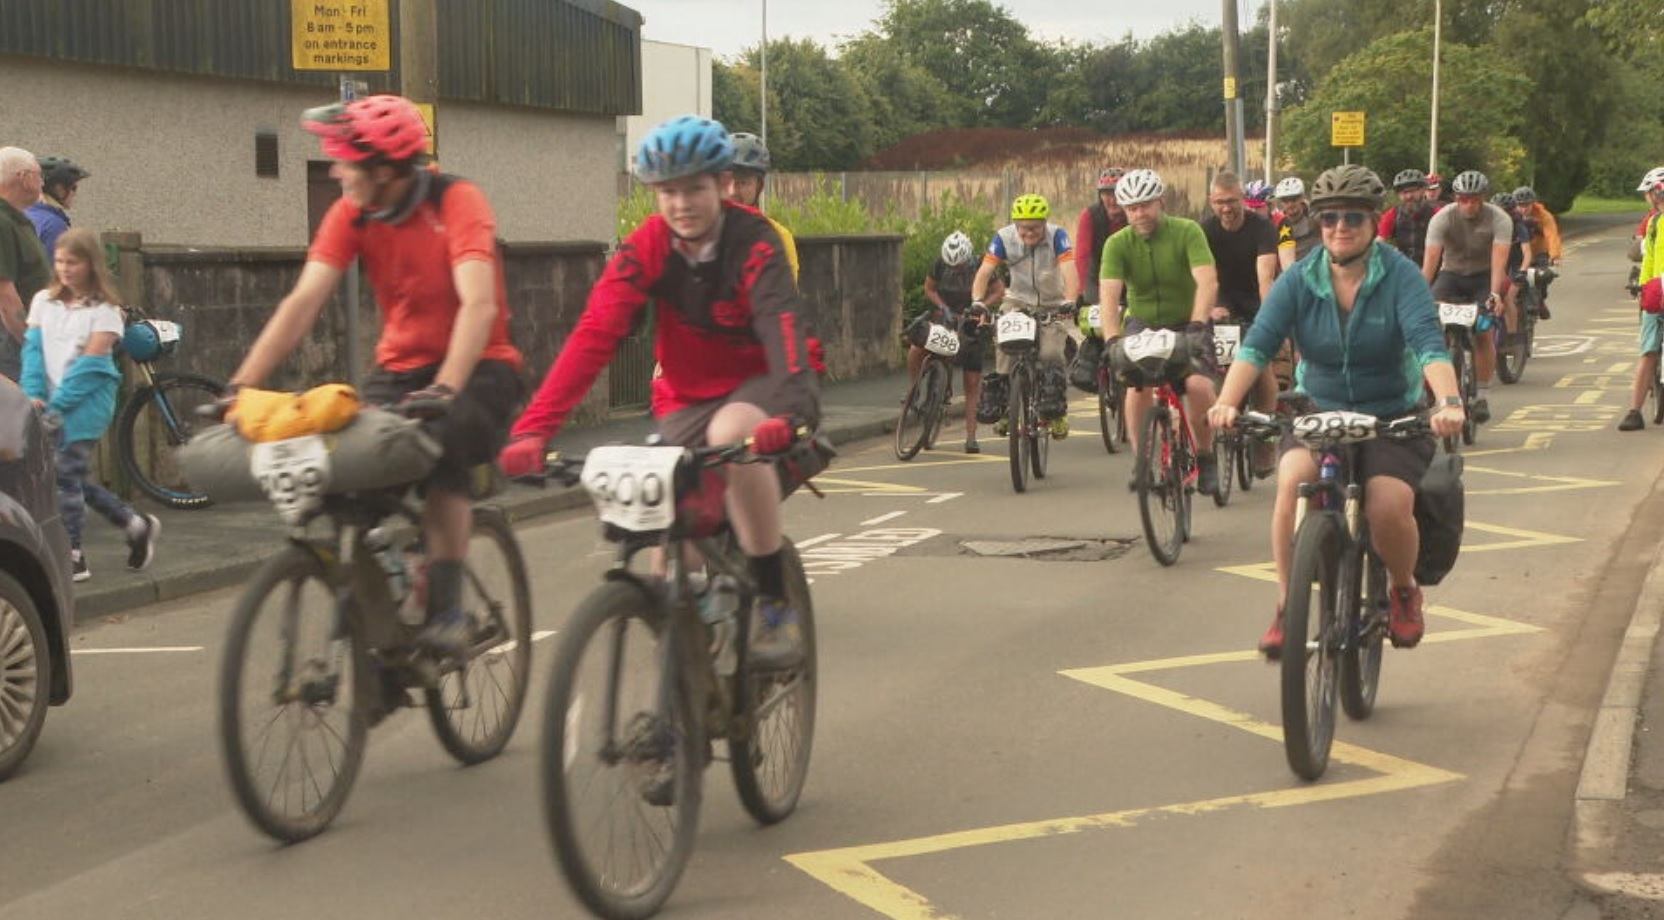 Cateran Dirt Dash saw more than 50 riders with camping gear take on 55-mile trip